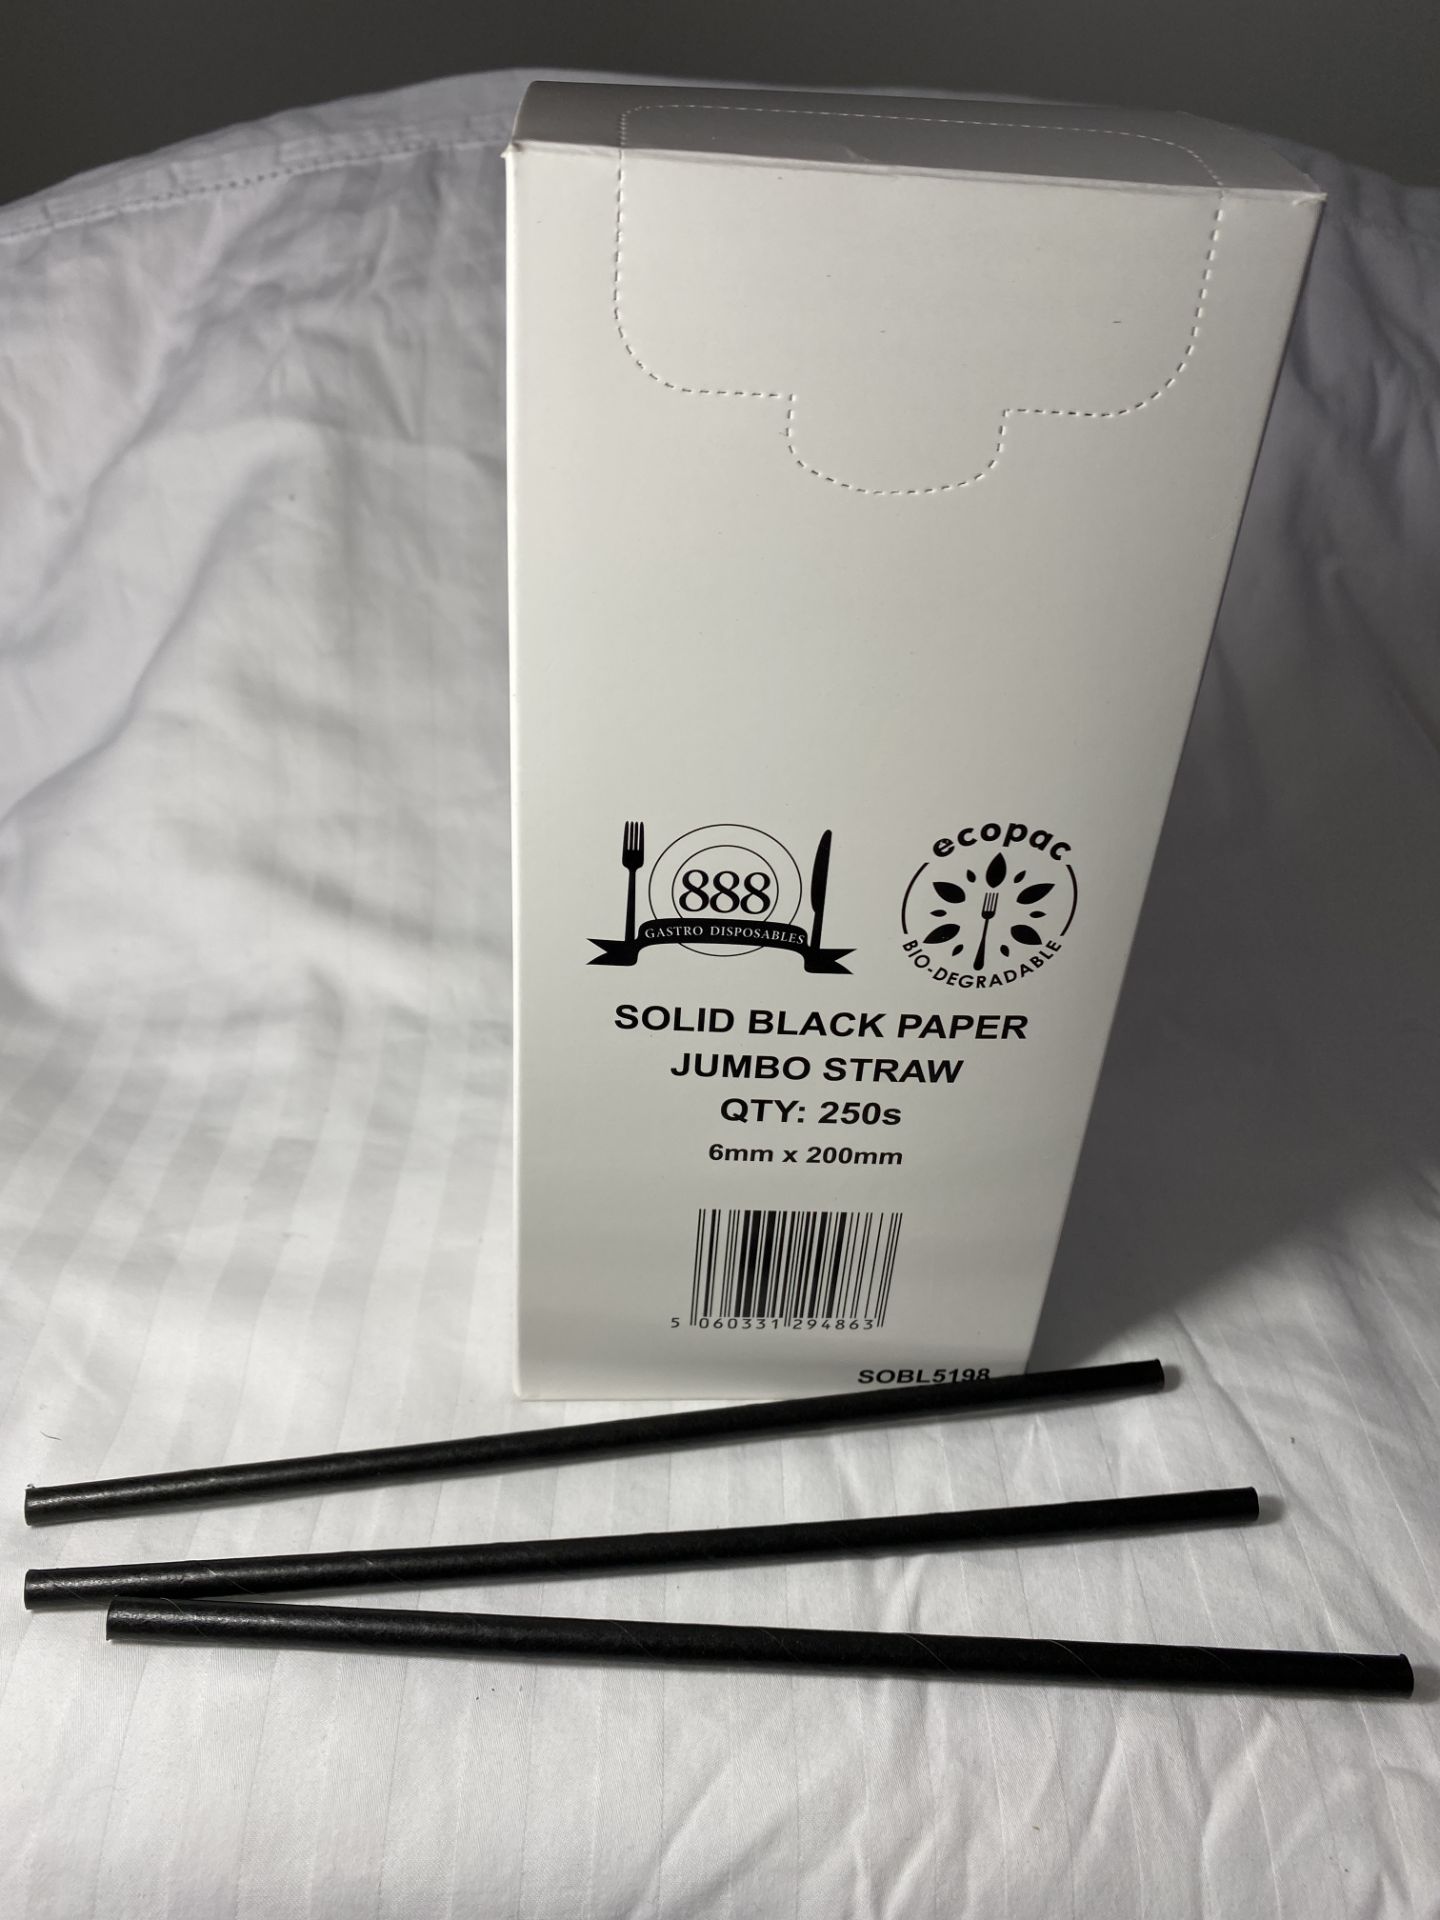 2 x Boxes of Biodegradable Jumbo Straws by 888 Gastro Disposables | DSP51 - Image 4 of 4